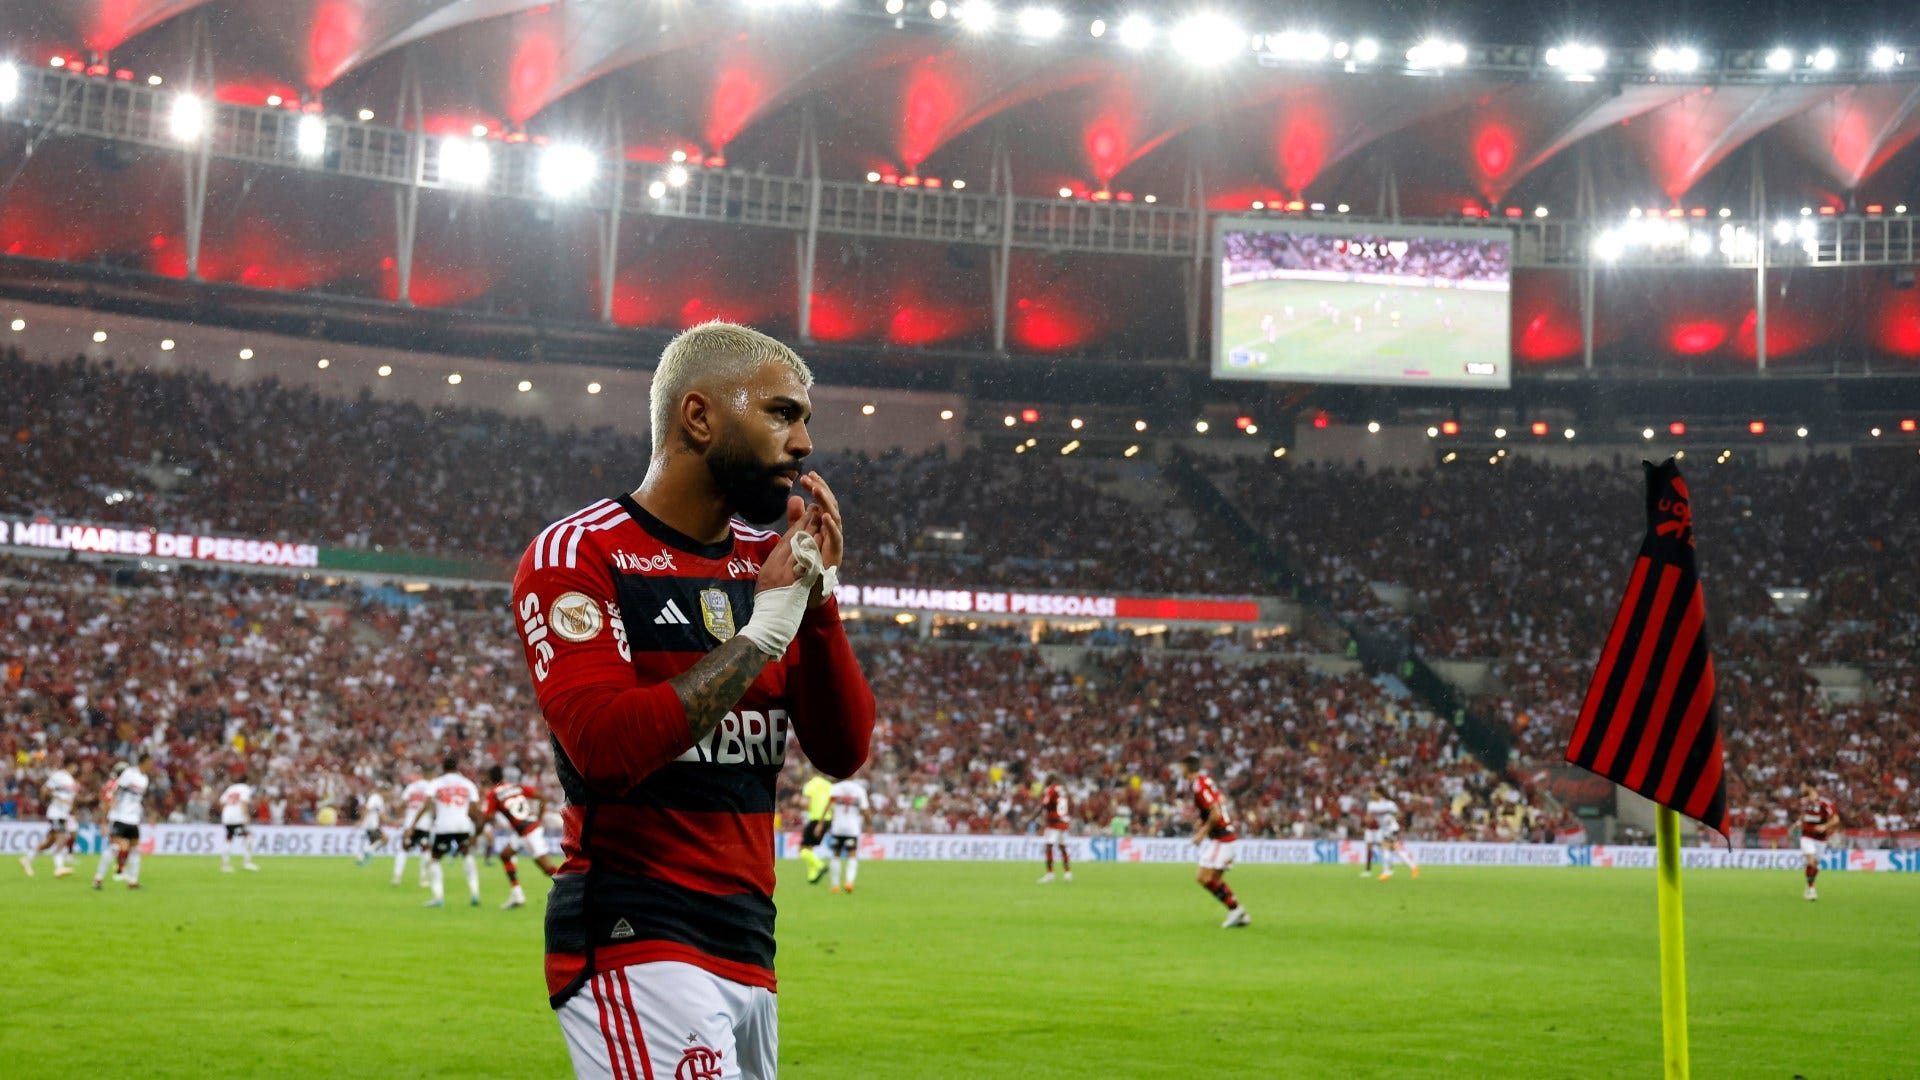 Flamengo vs Internacional Live stream, TV channel, kick-off time and where to watch Goal US